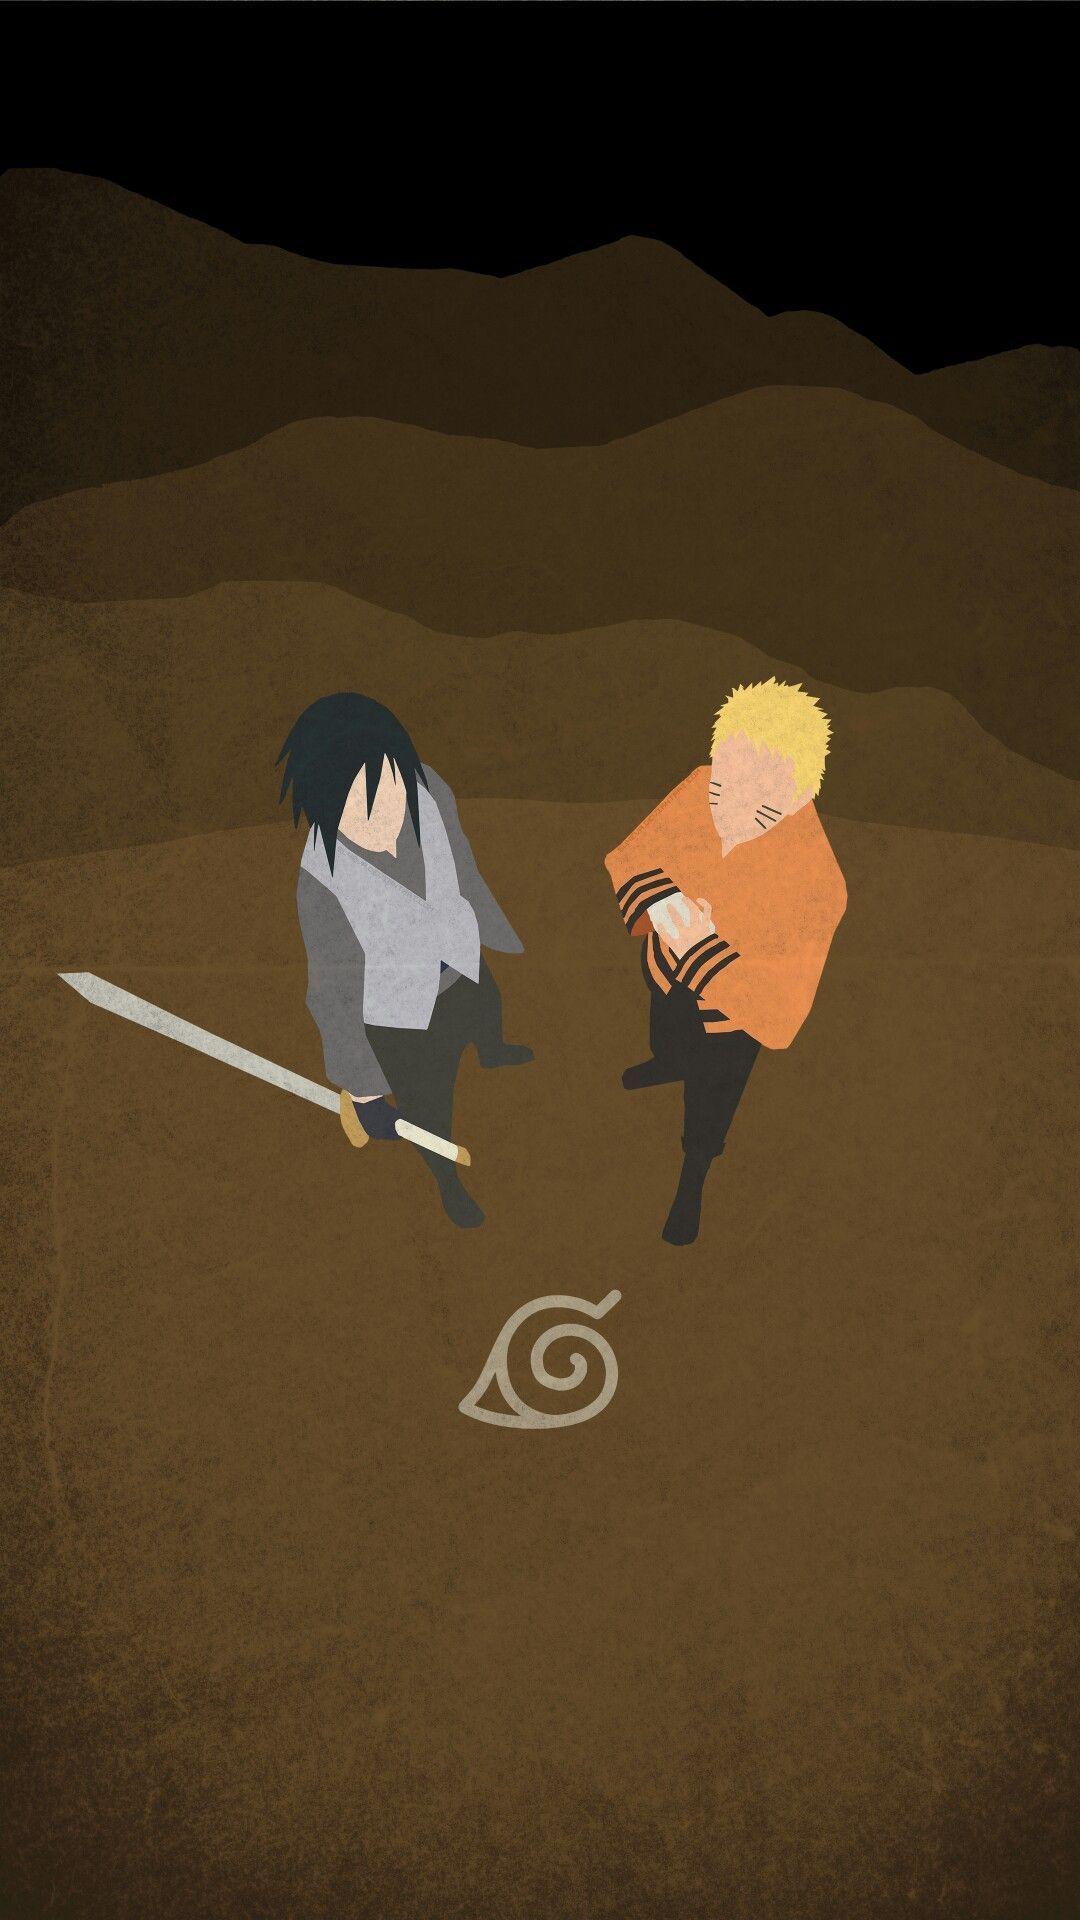 Naruto Shippuden. Cell Phone Wallpapers 2017 - Wallpaper Cave